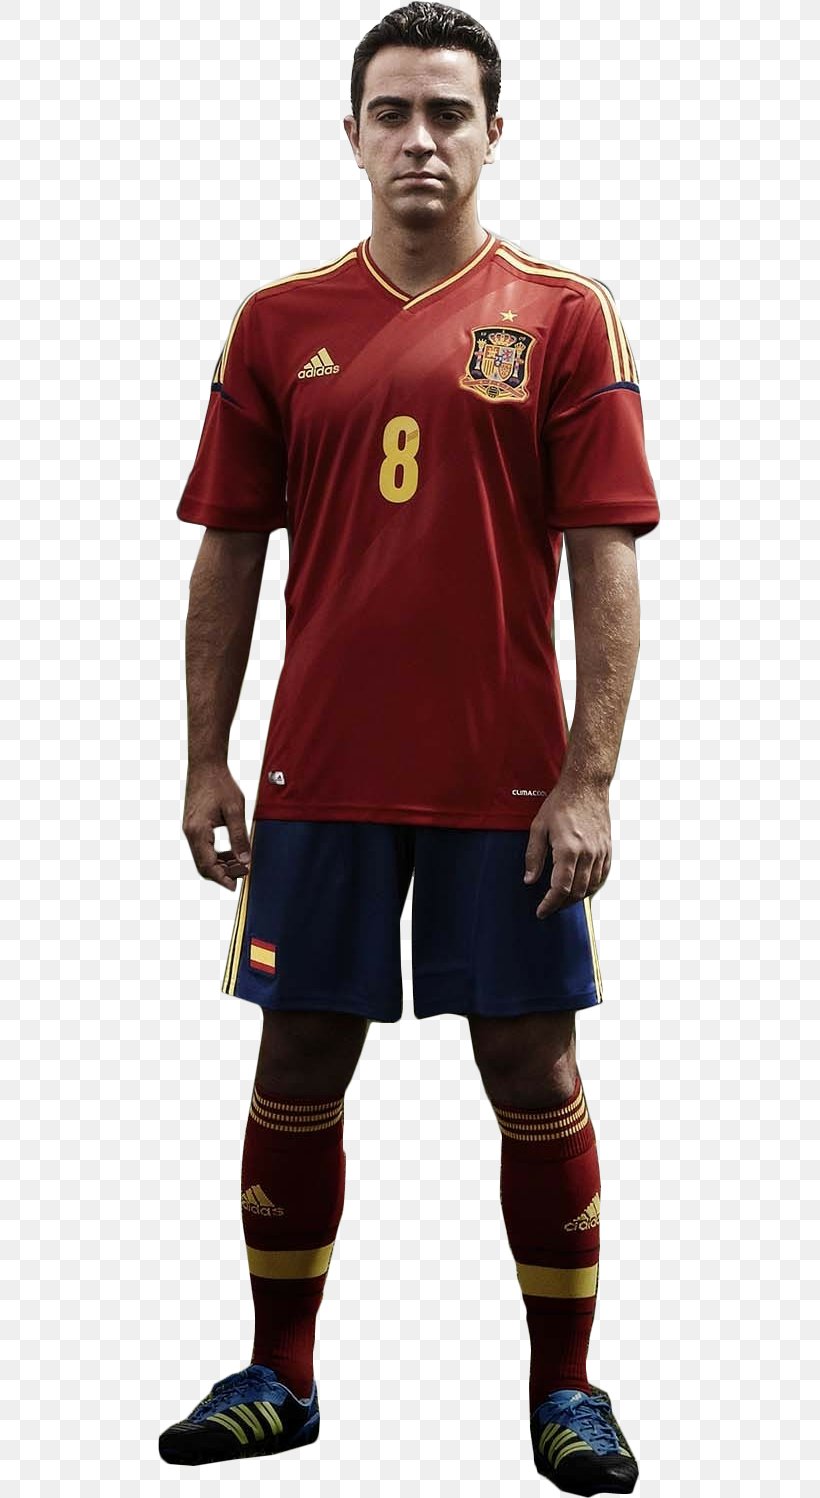 Xavi Football Player Protective Gear In Sports, PNG, 503x1498px, Xavi, American Football, American Football Protective Gear, Football, Football Equipment And Supplies Download Free